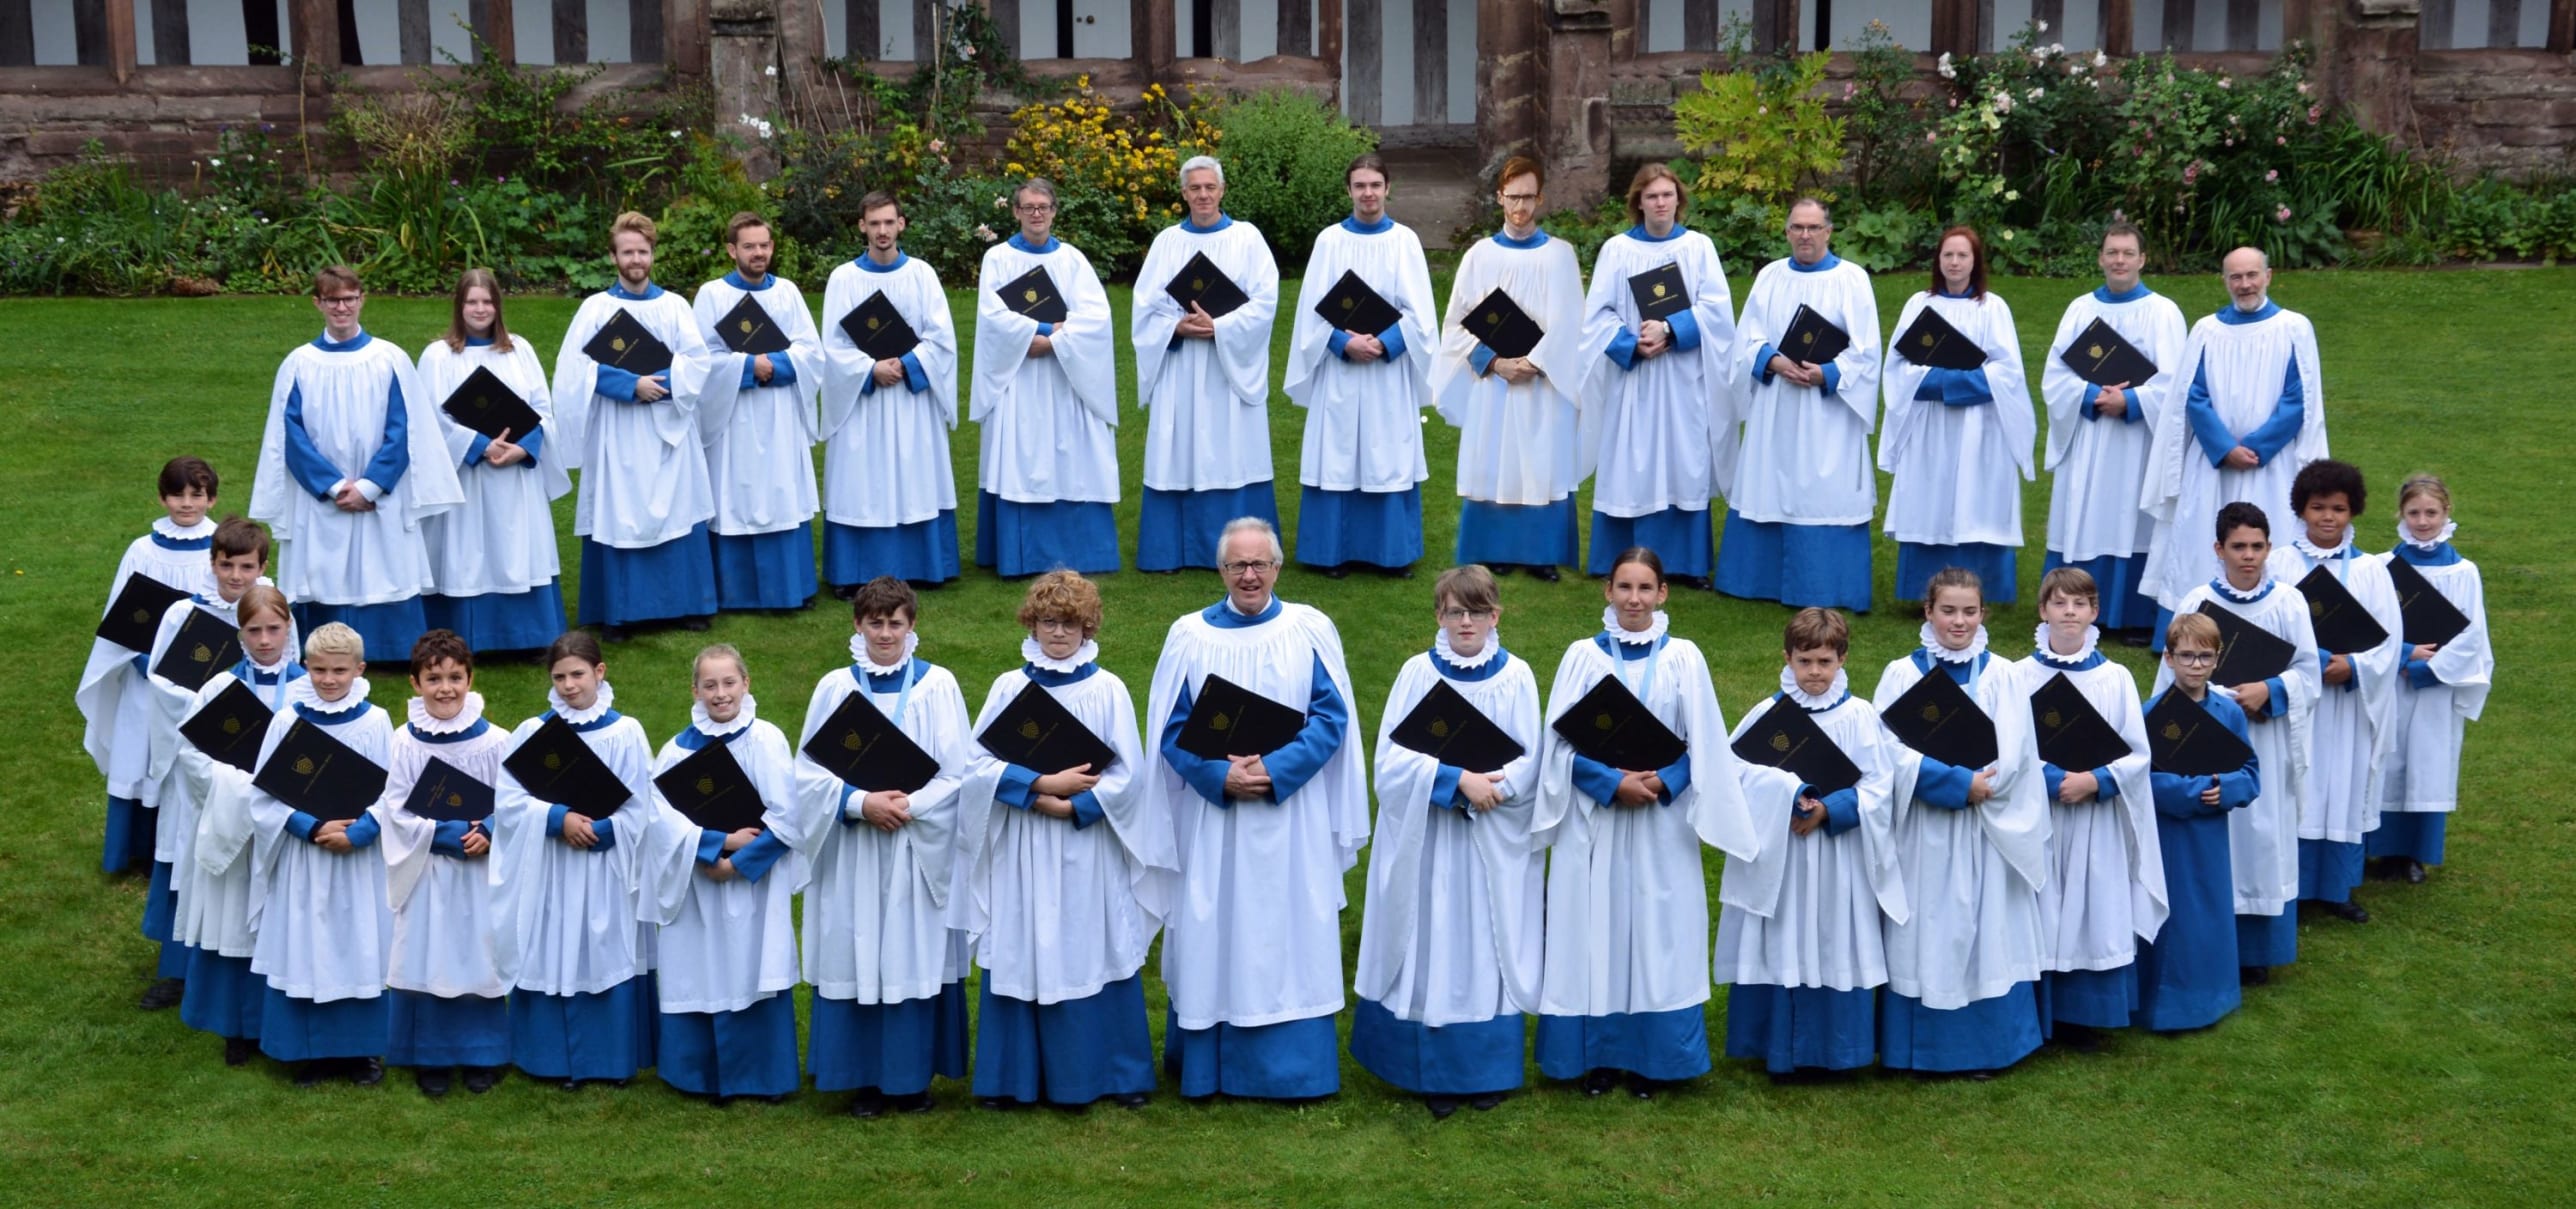 The choir of Hereford Cathedral stand in a circle in the Cloisters. They are wearing white and holding music scores in their arms. The choir consists of adults and children and they are all looking formally at the camera